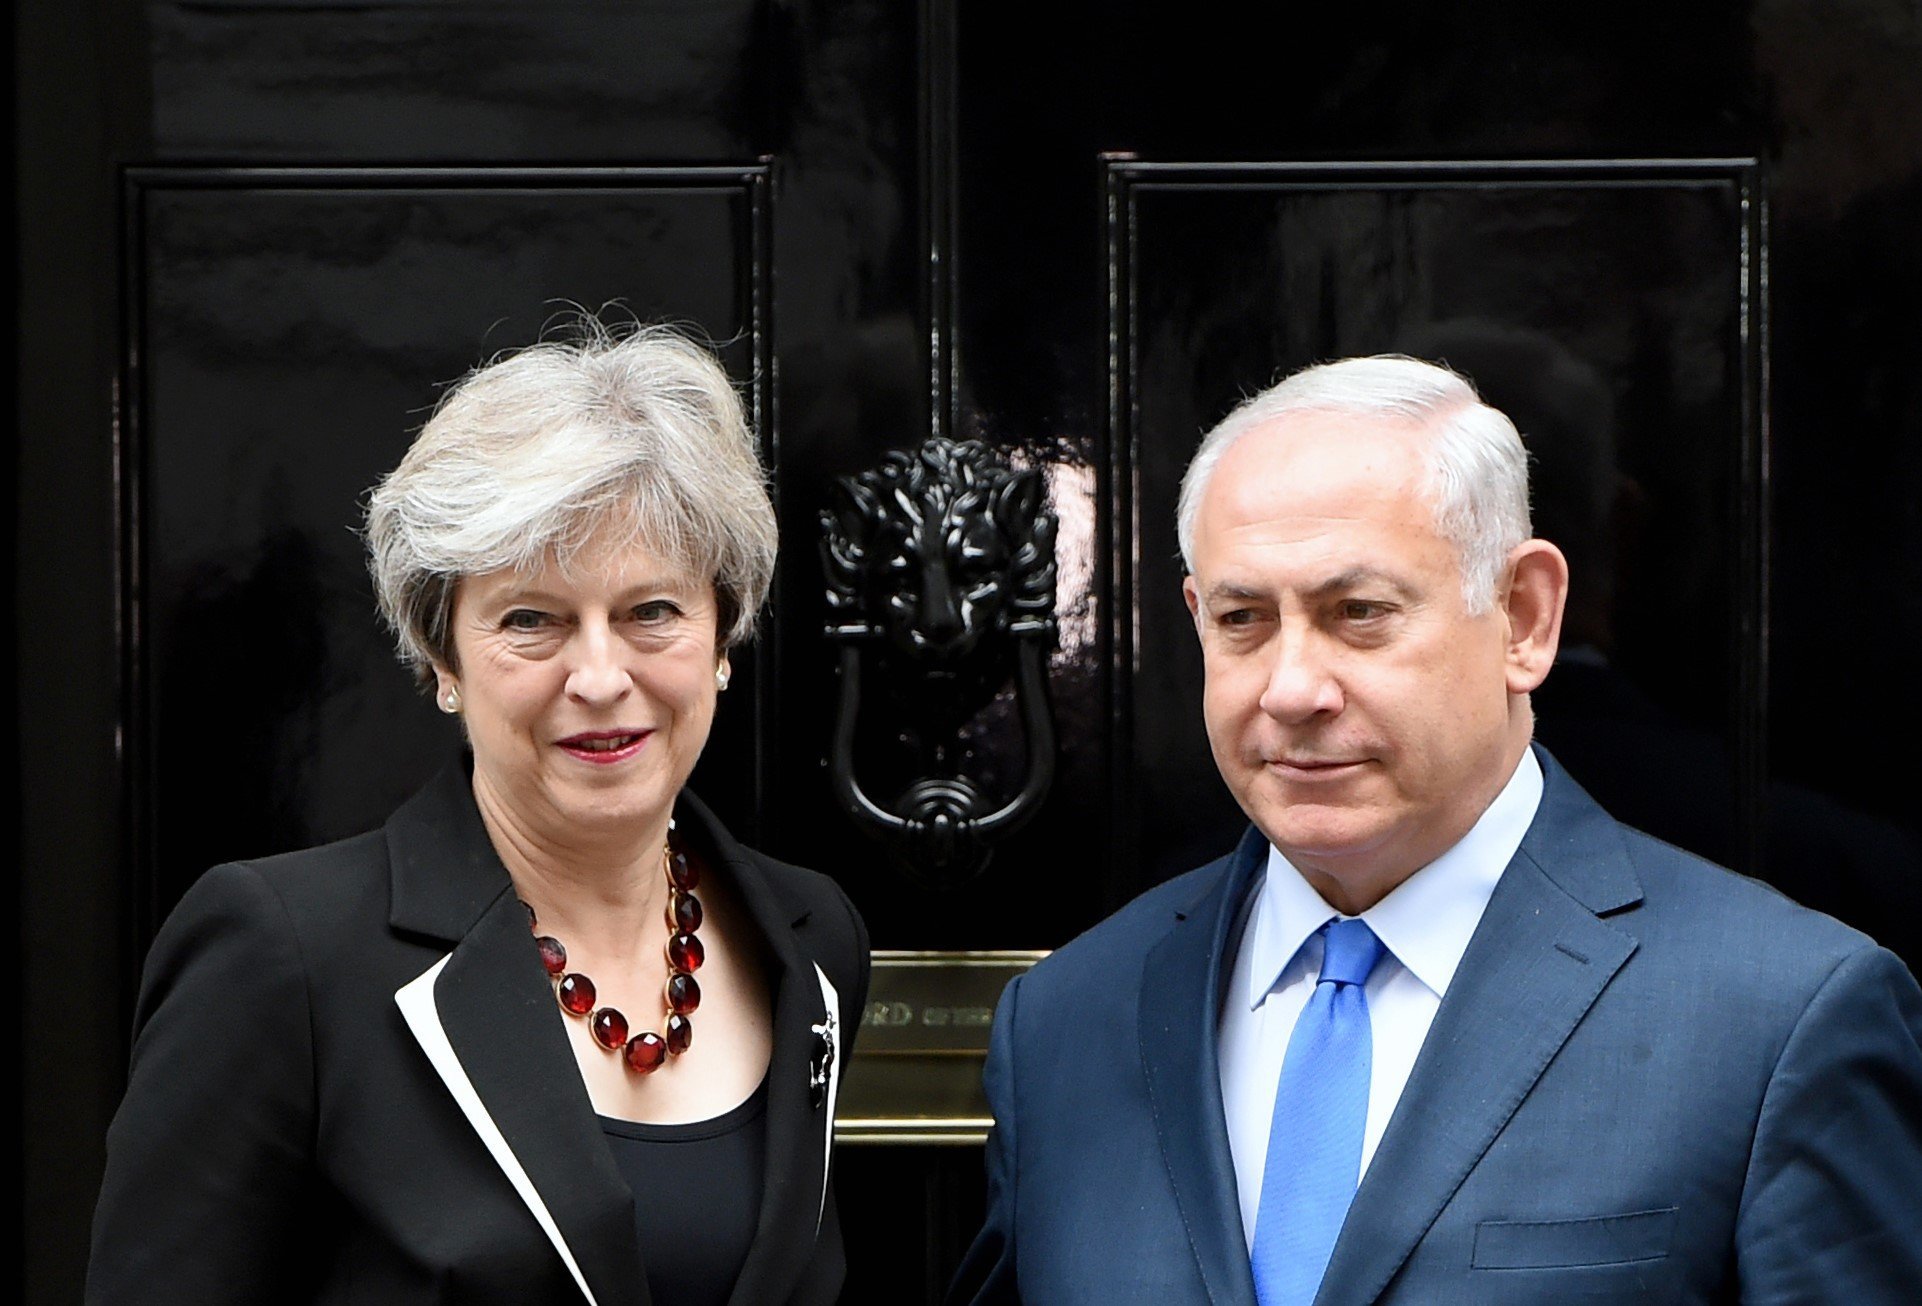 Theresa May greets&nbsp;Israeli Prime Minister Benjamin Netanyahu. She did not know at the time that Priti Patel has also met him.